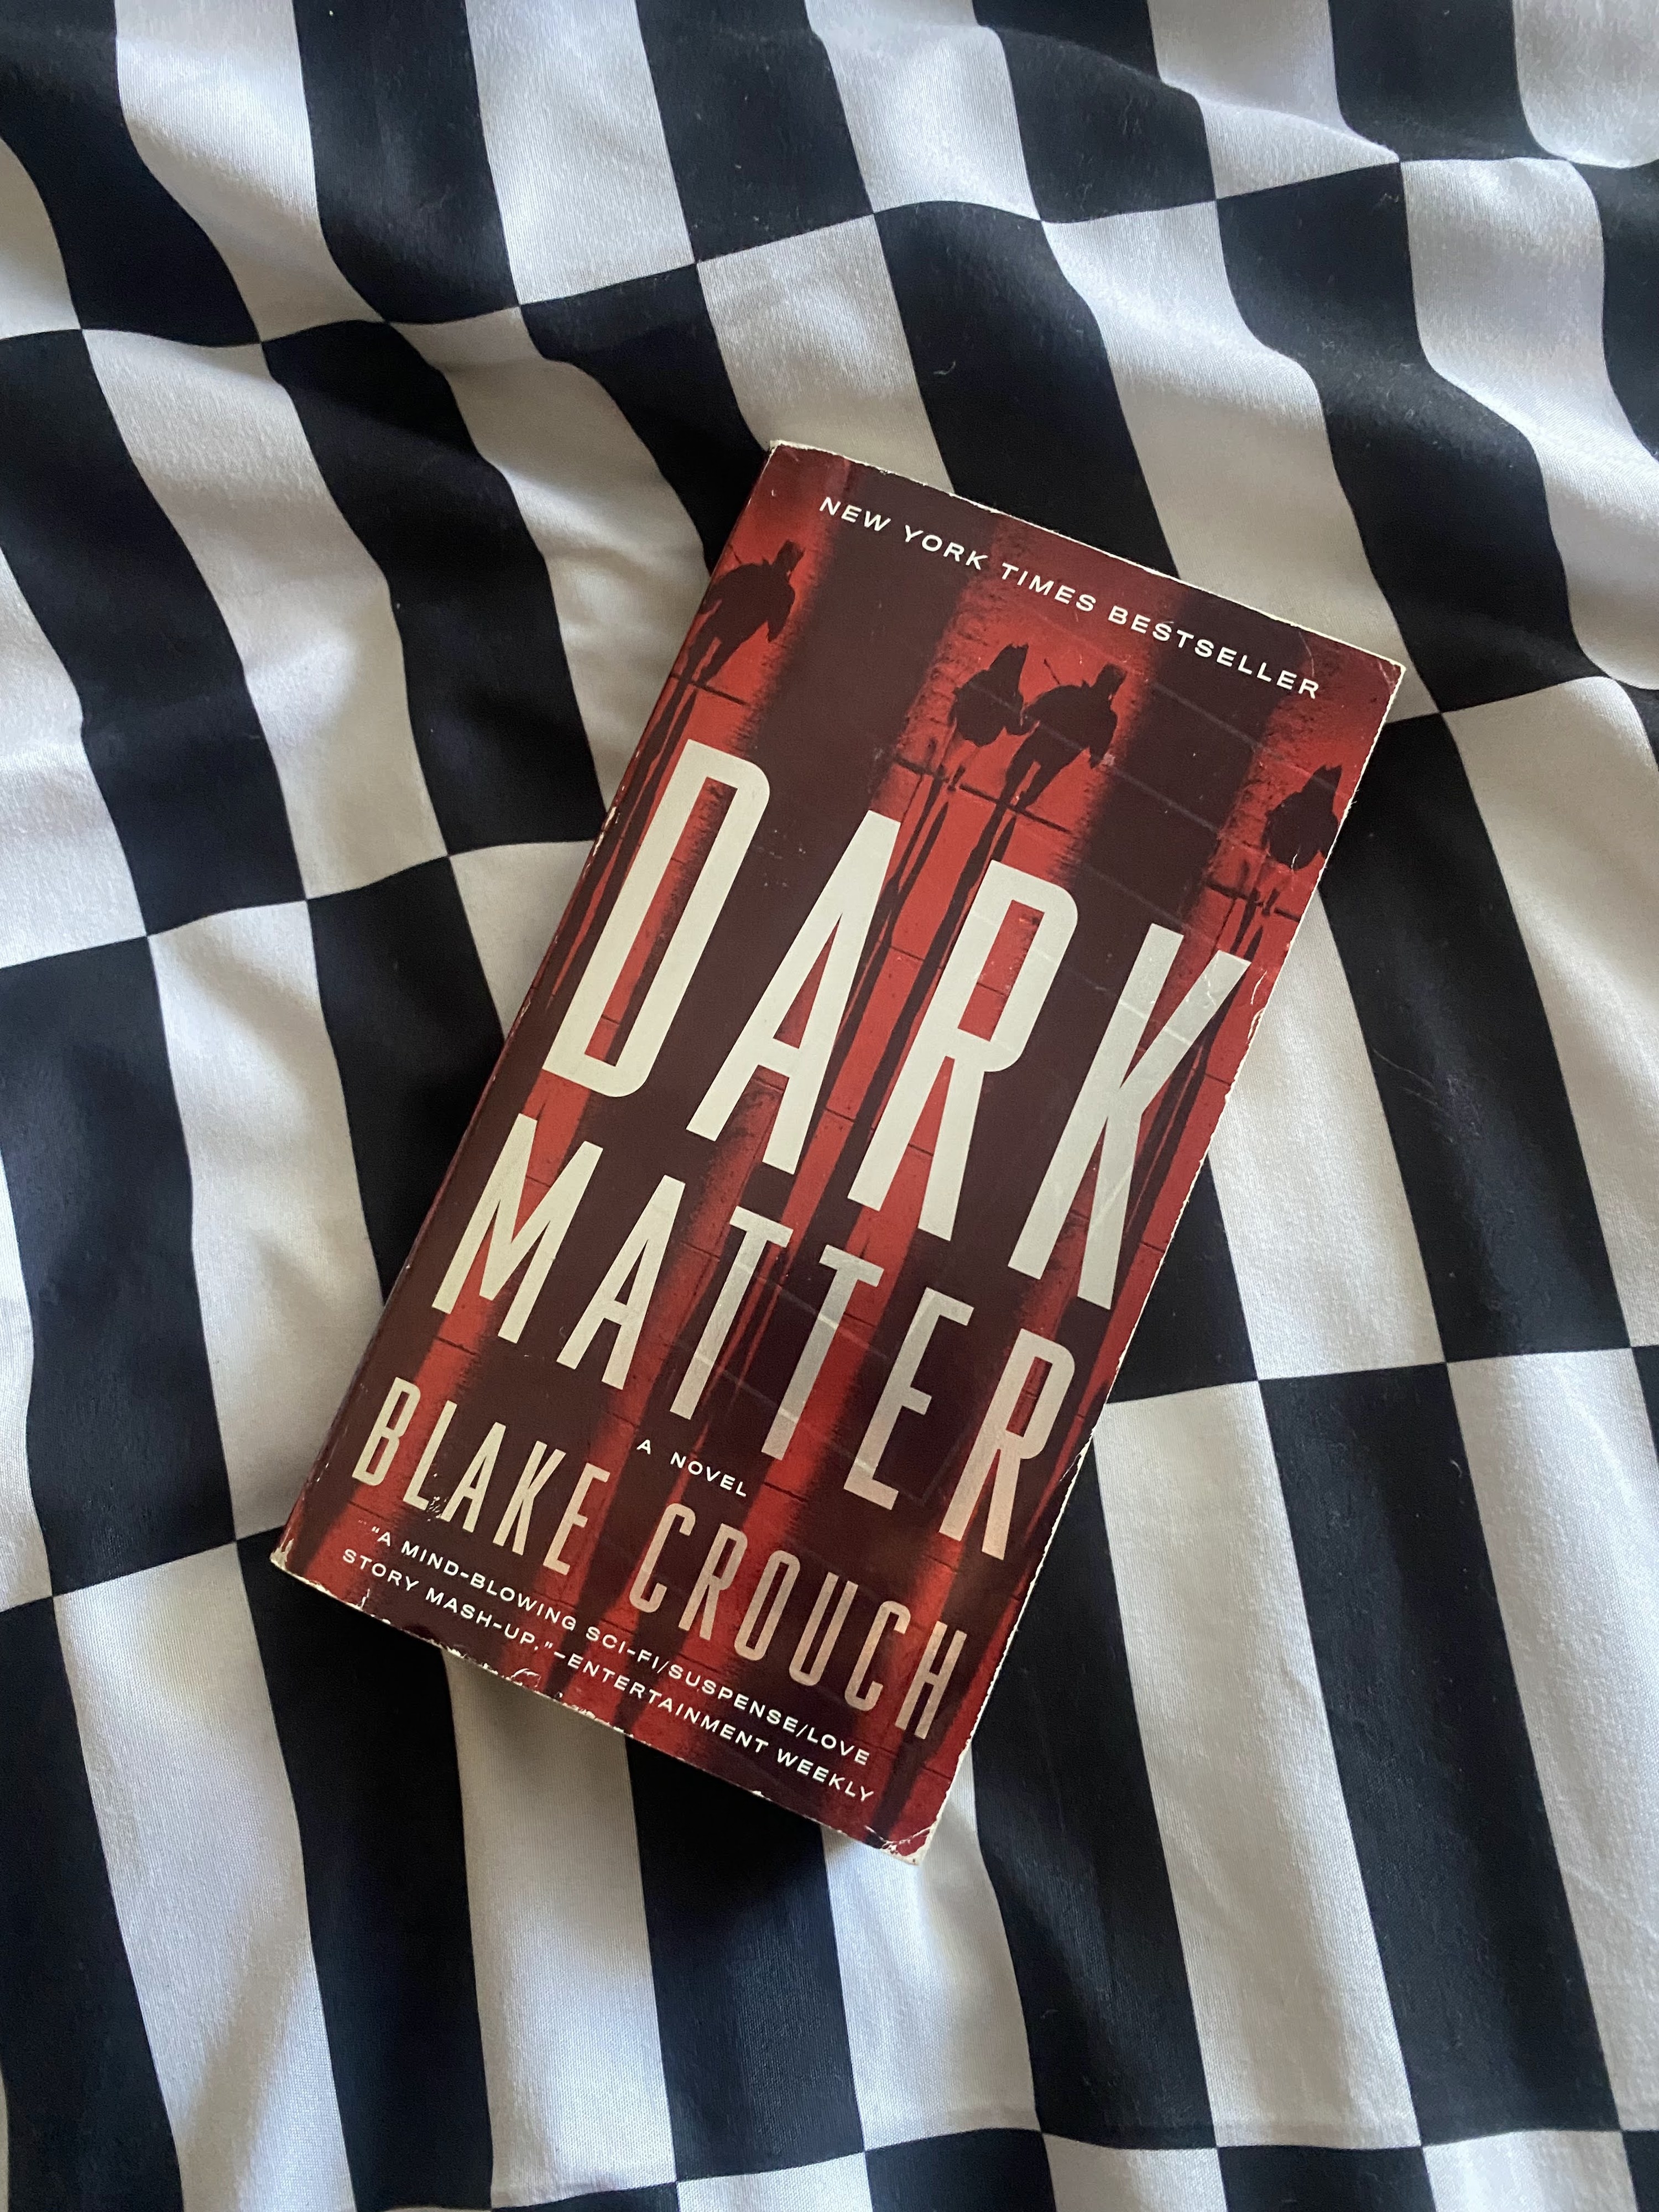 A photo of the book &quot;Dark Matter&quot; by Blake Crouch.